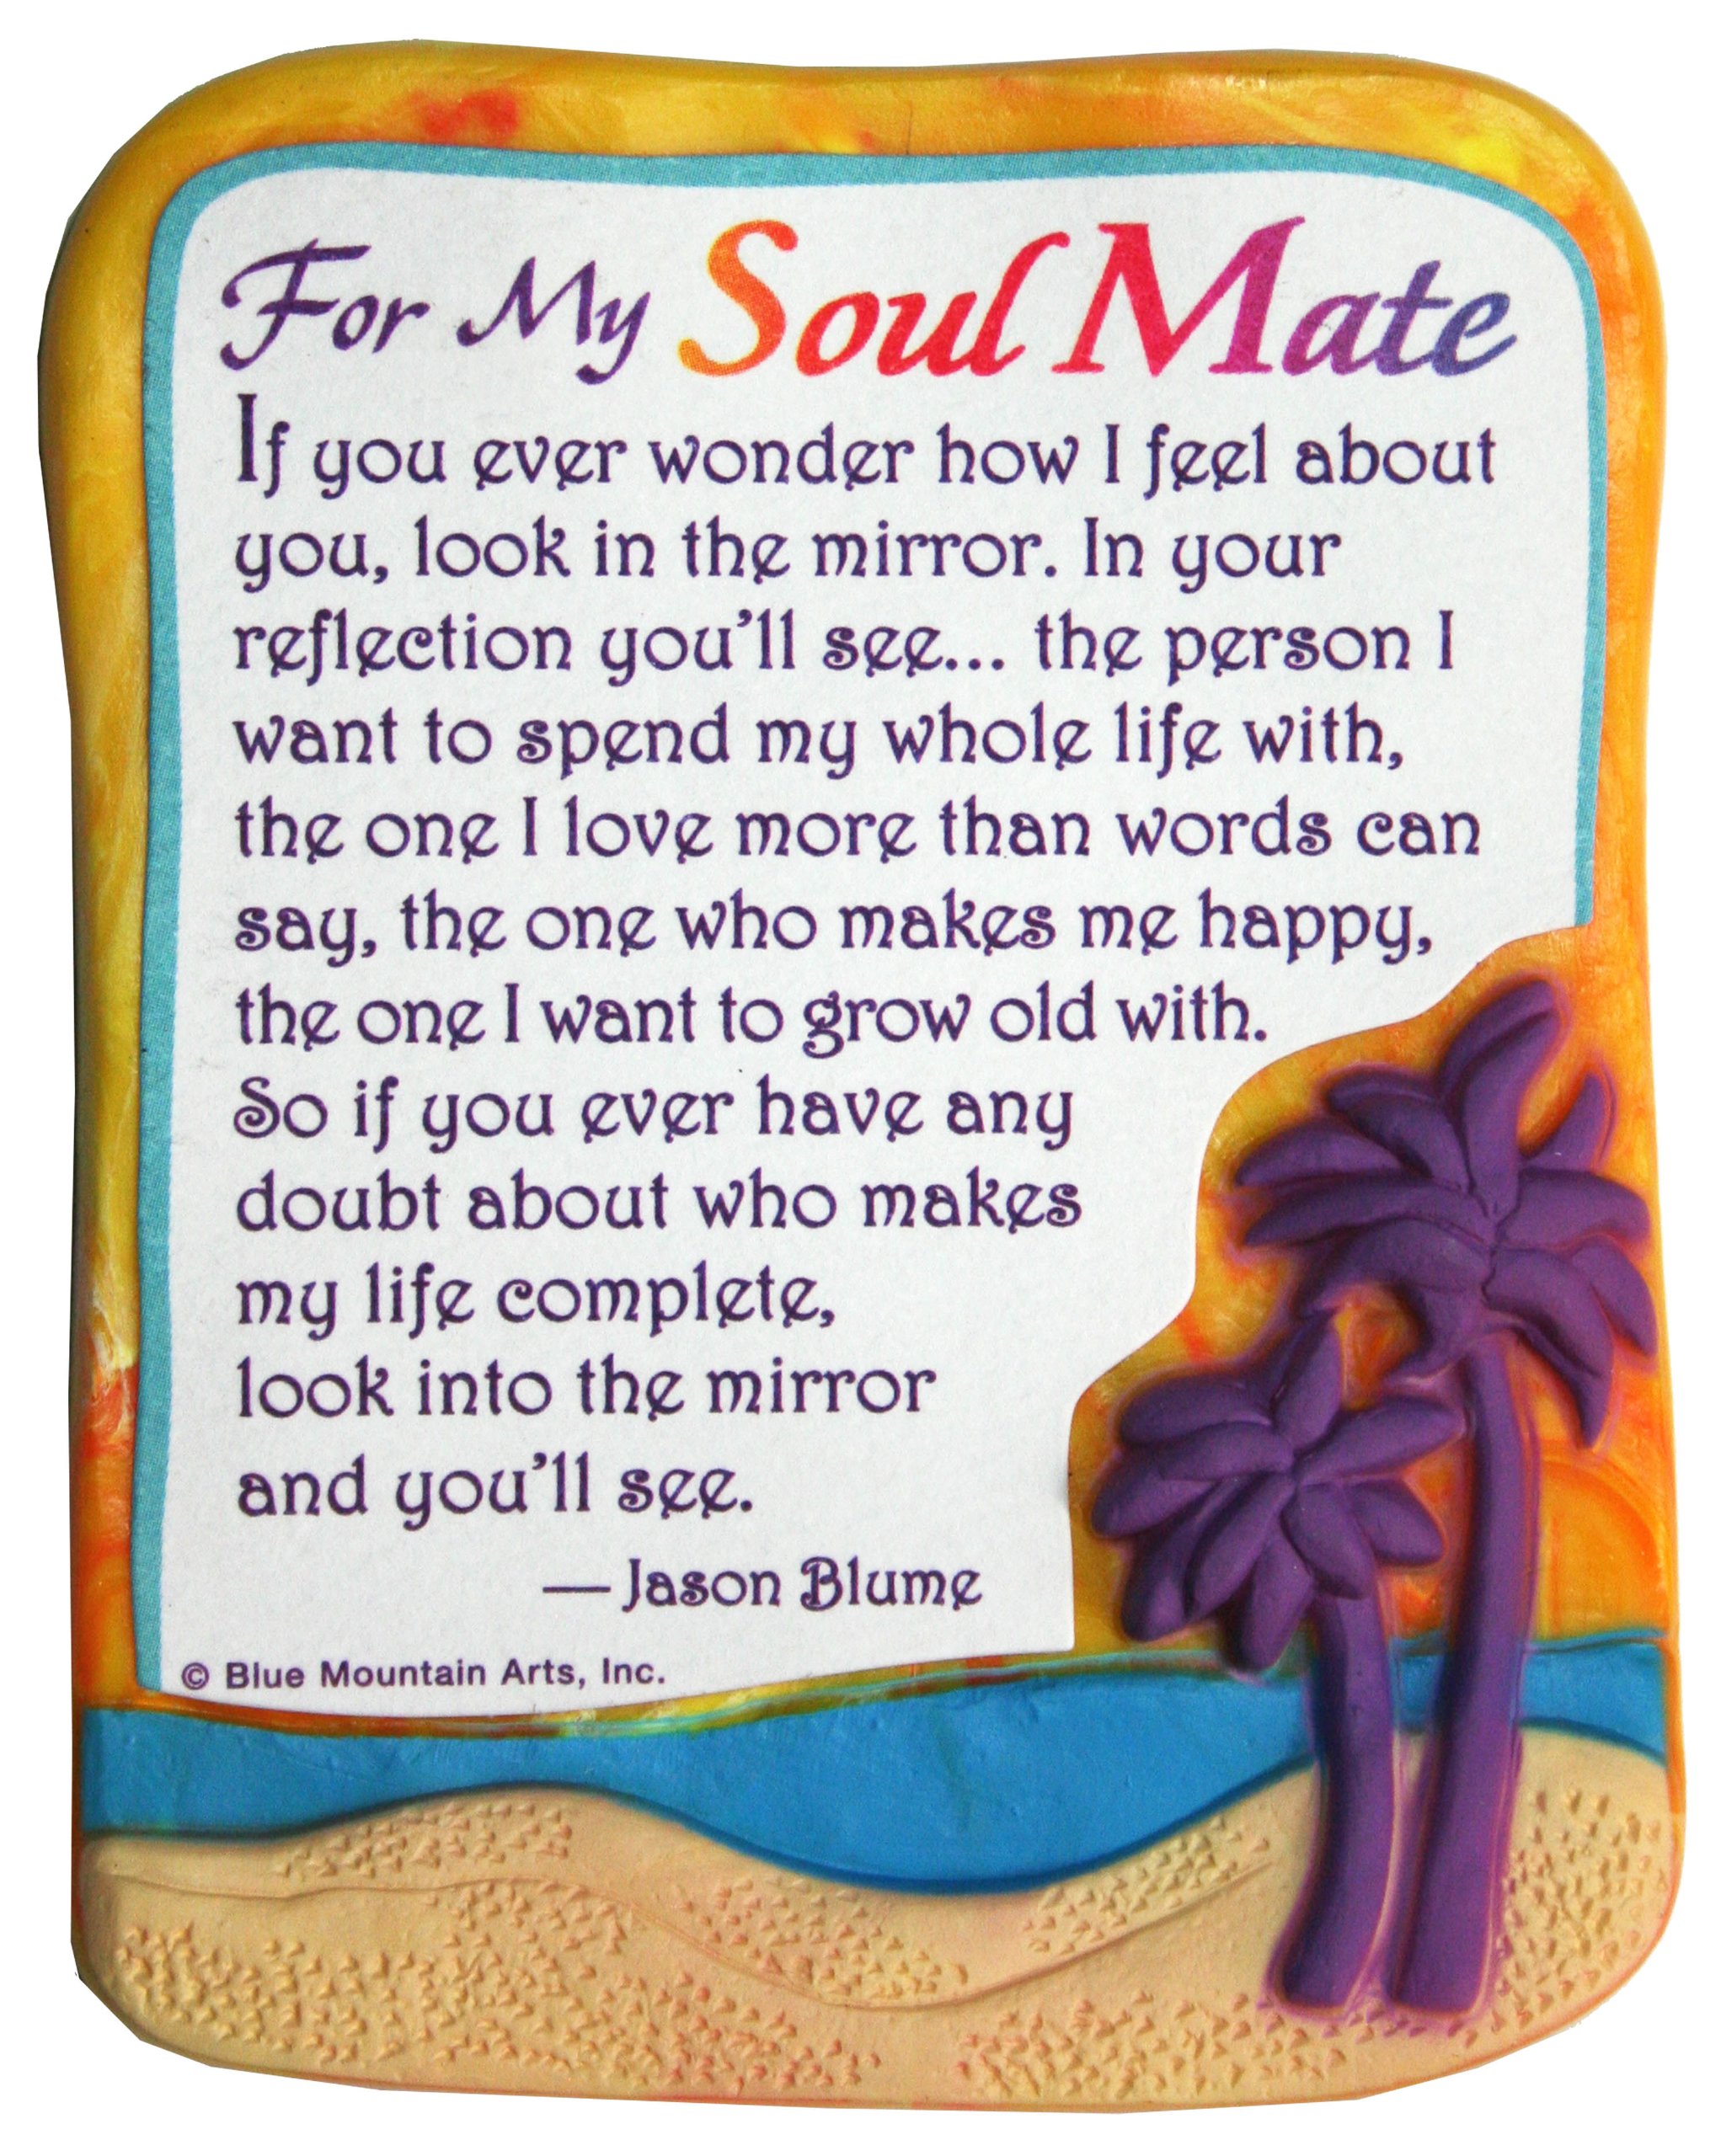 Blue Mountain Arts Love Refrigerator Magnet—Romantic Message for The Love of Your Life (for My Soul Mate) Small